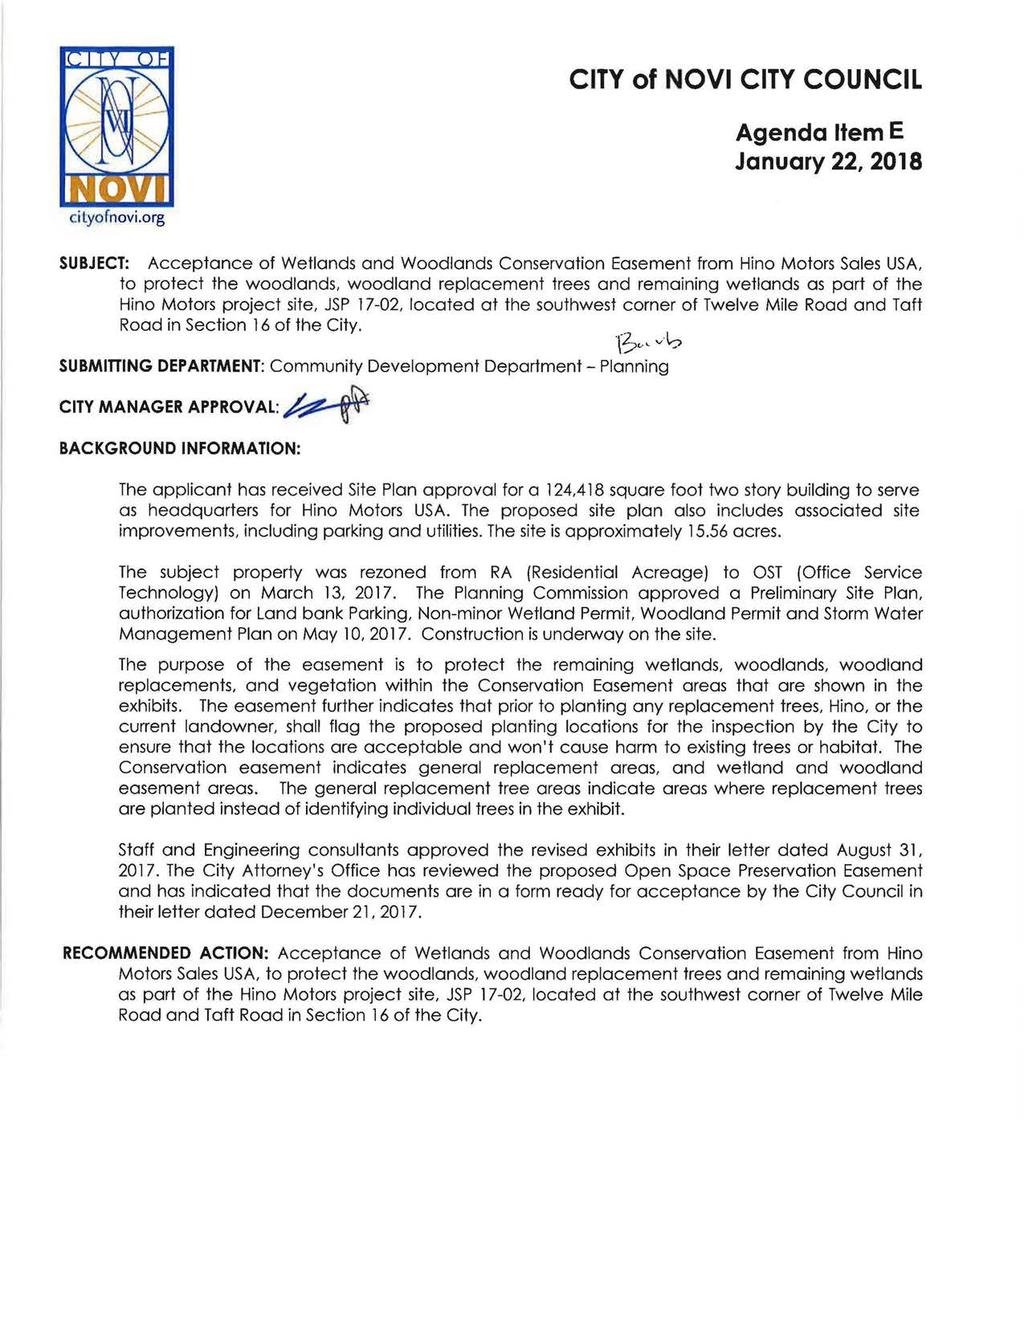 CTY of NOV CTY COUNCL Agenda tem E January 22, 2018 SUBJECT: Acceptance of Wetlands and Woodlands Conservation Easement from Hino Motors Sales USA, to protect the woodlands, woodland replacement